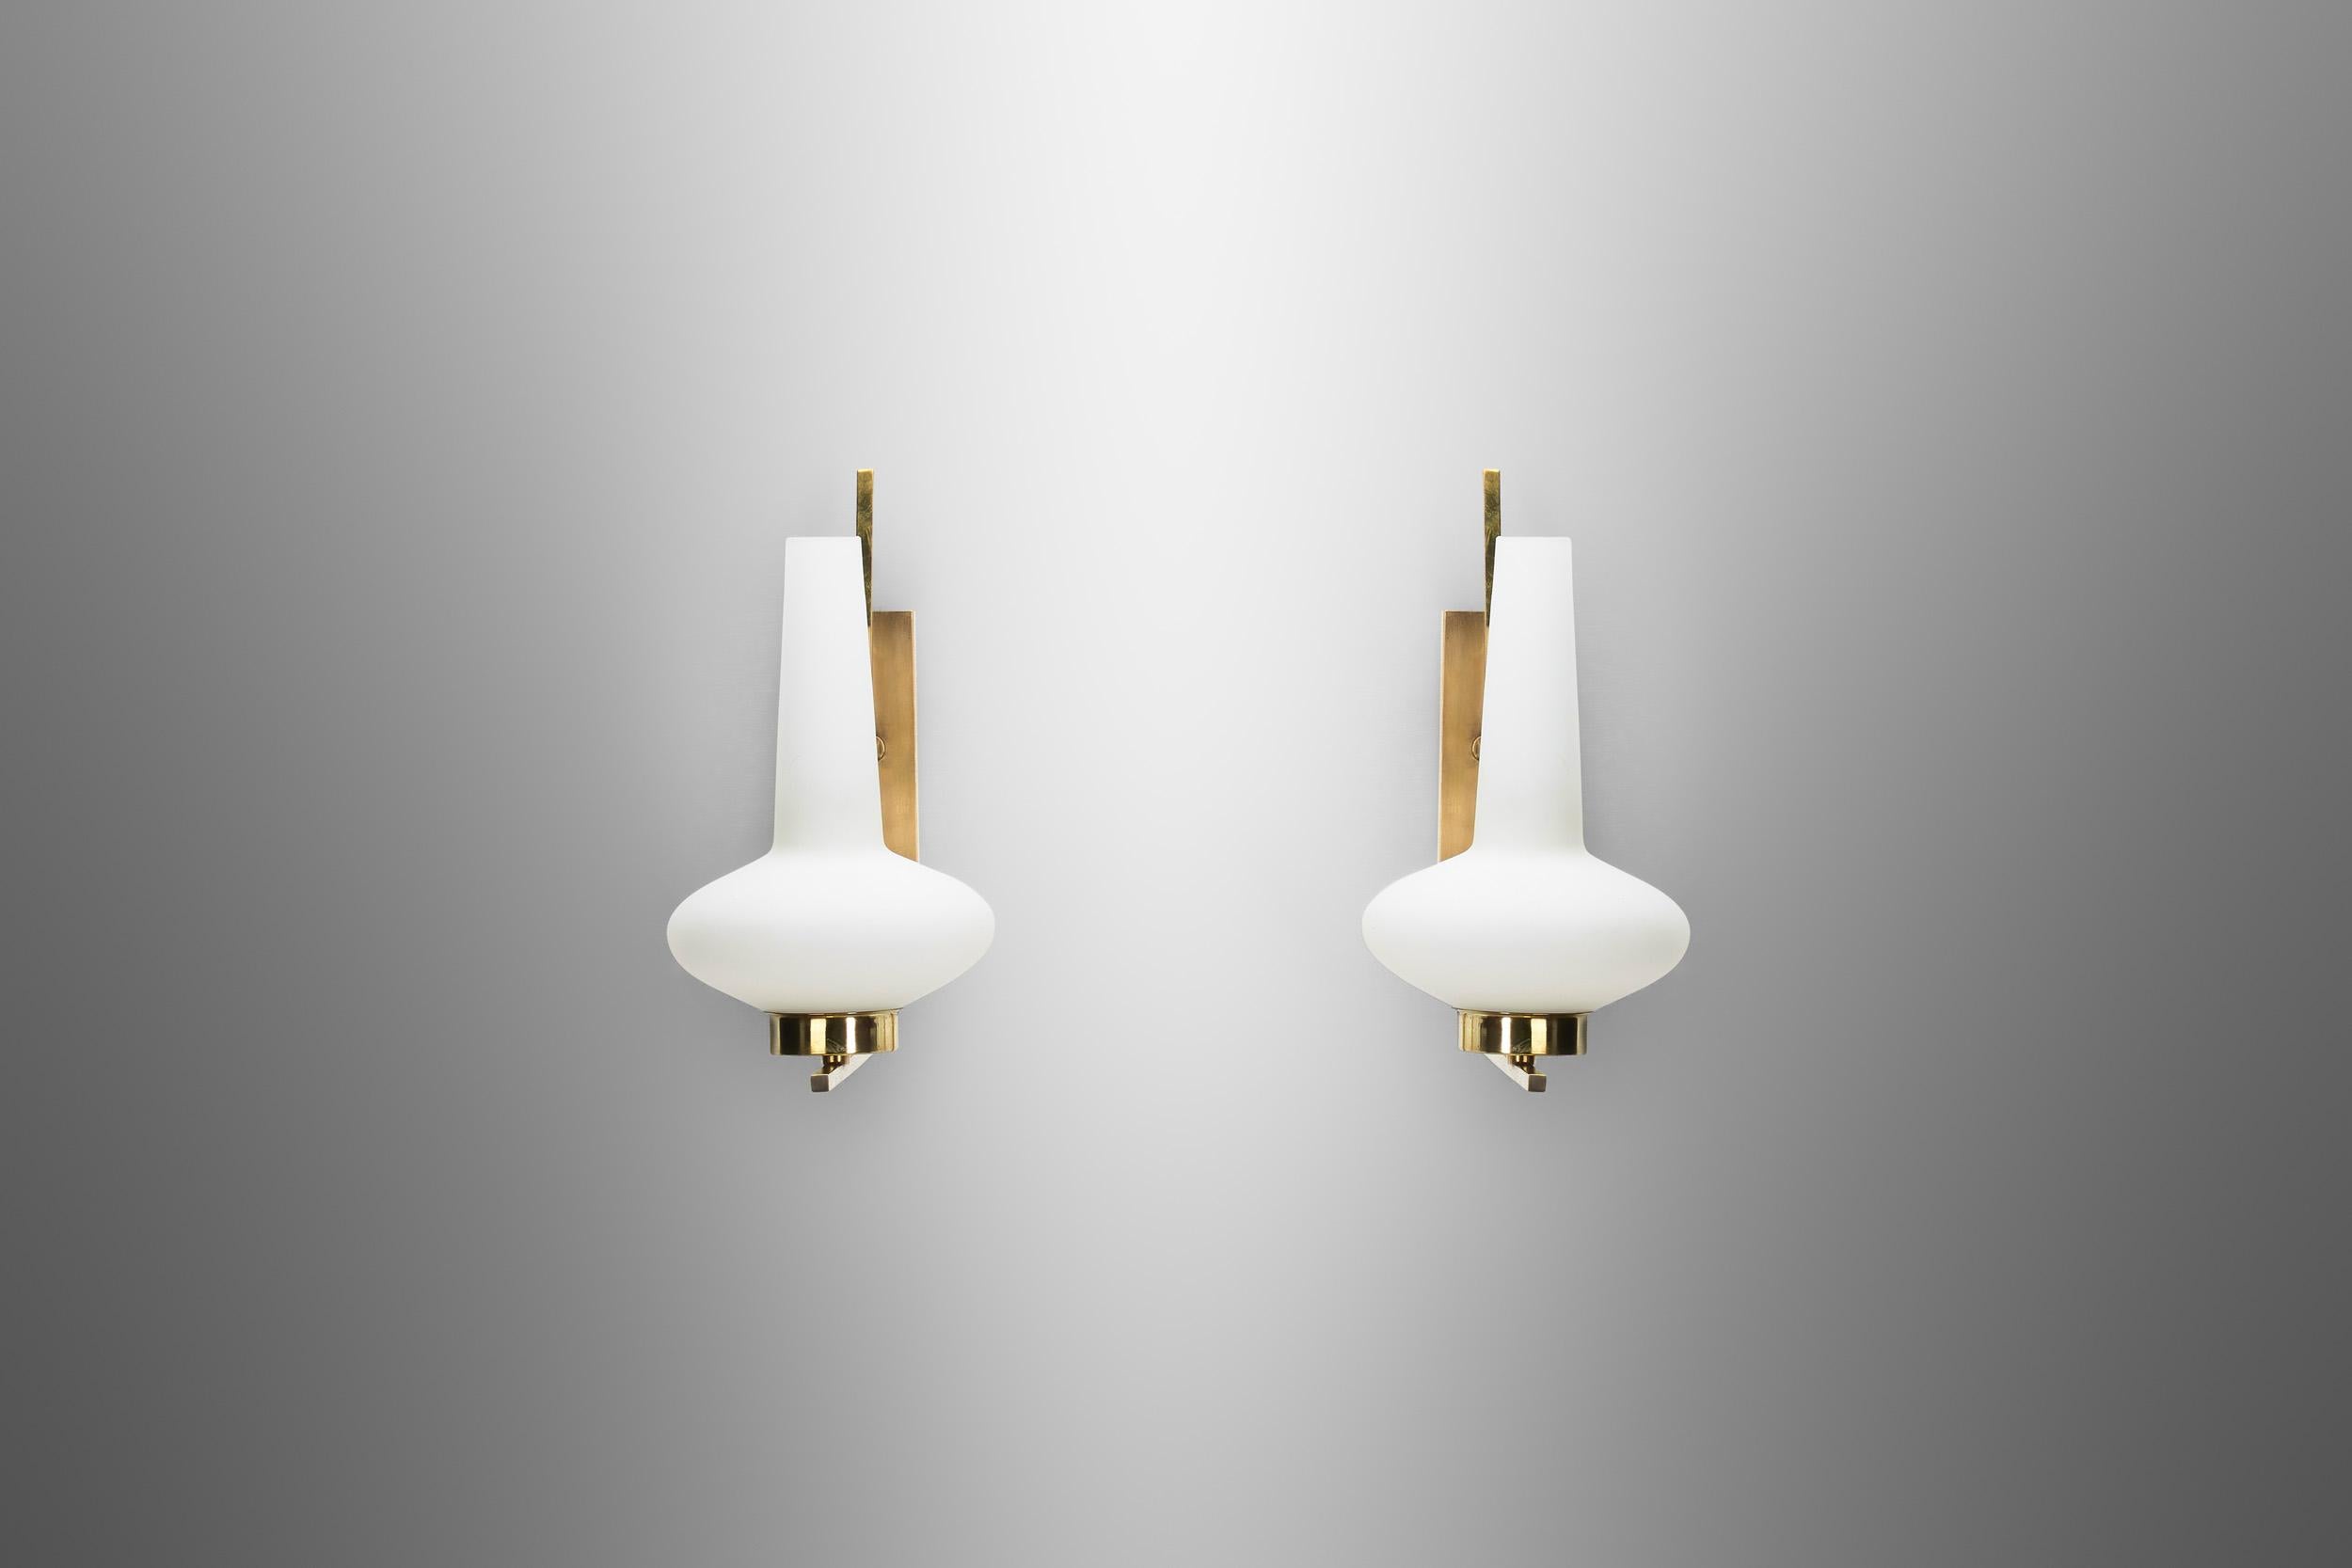 Italian Mid-Century Modern Brass Wall Lamps, Italy, 1950s For Sale 3